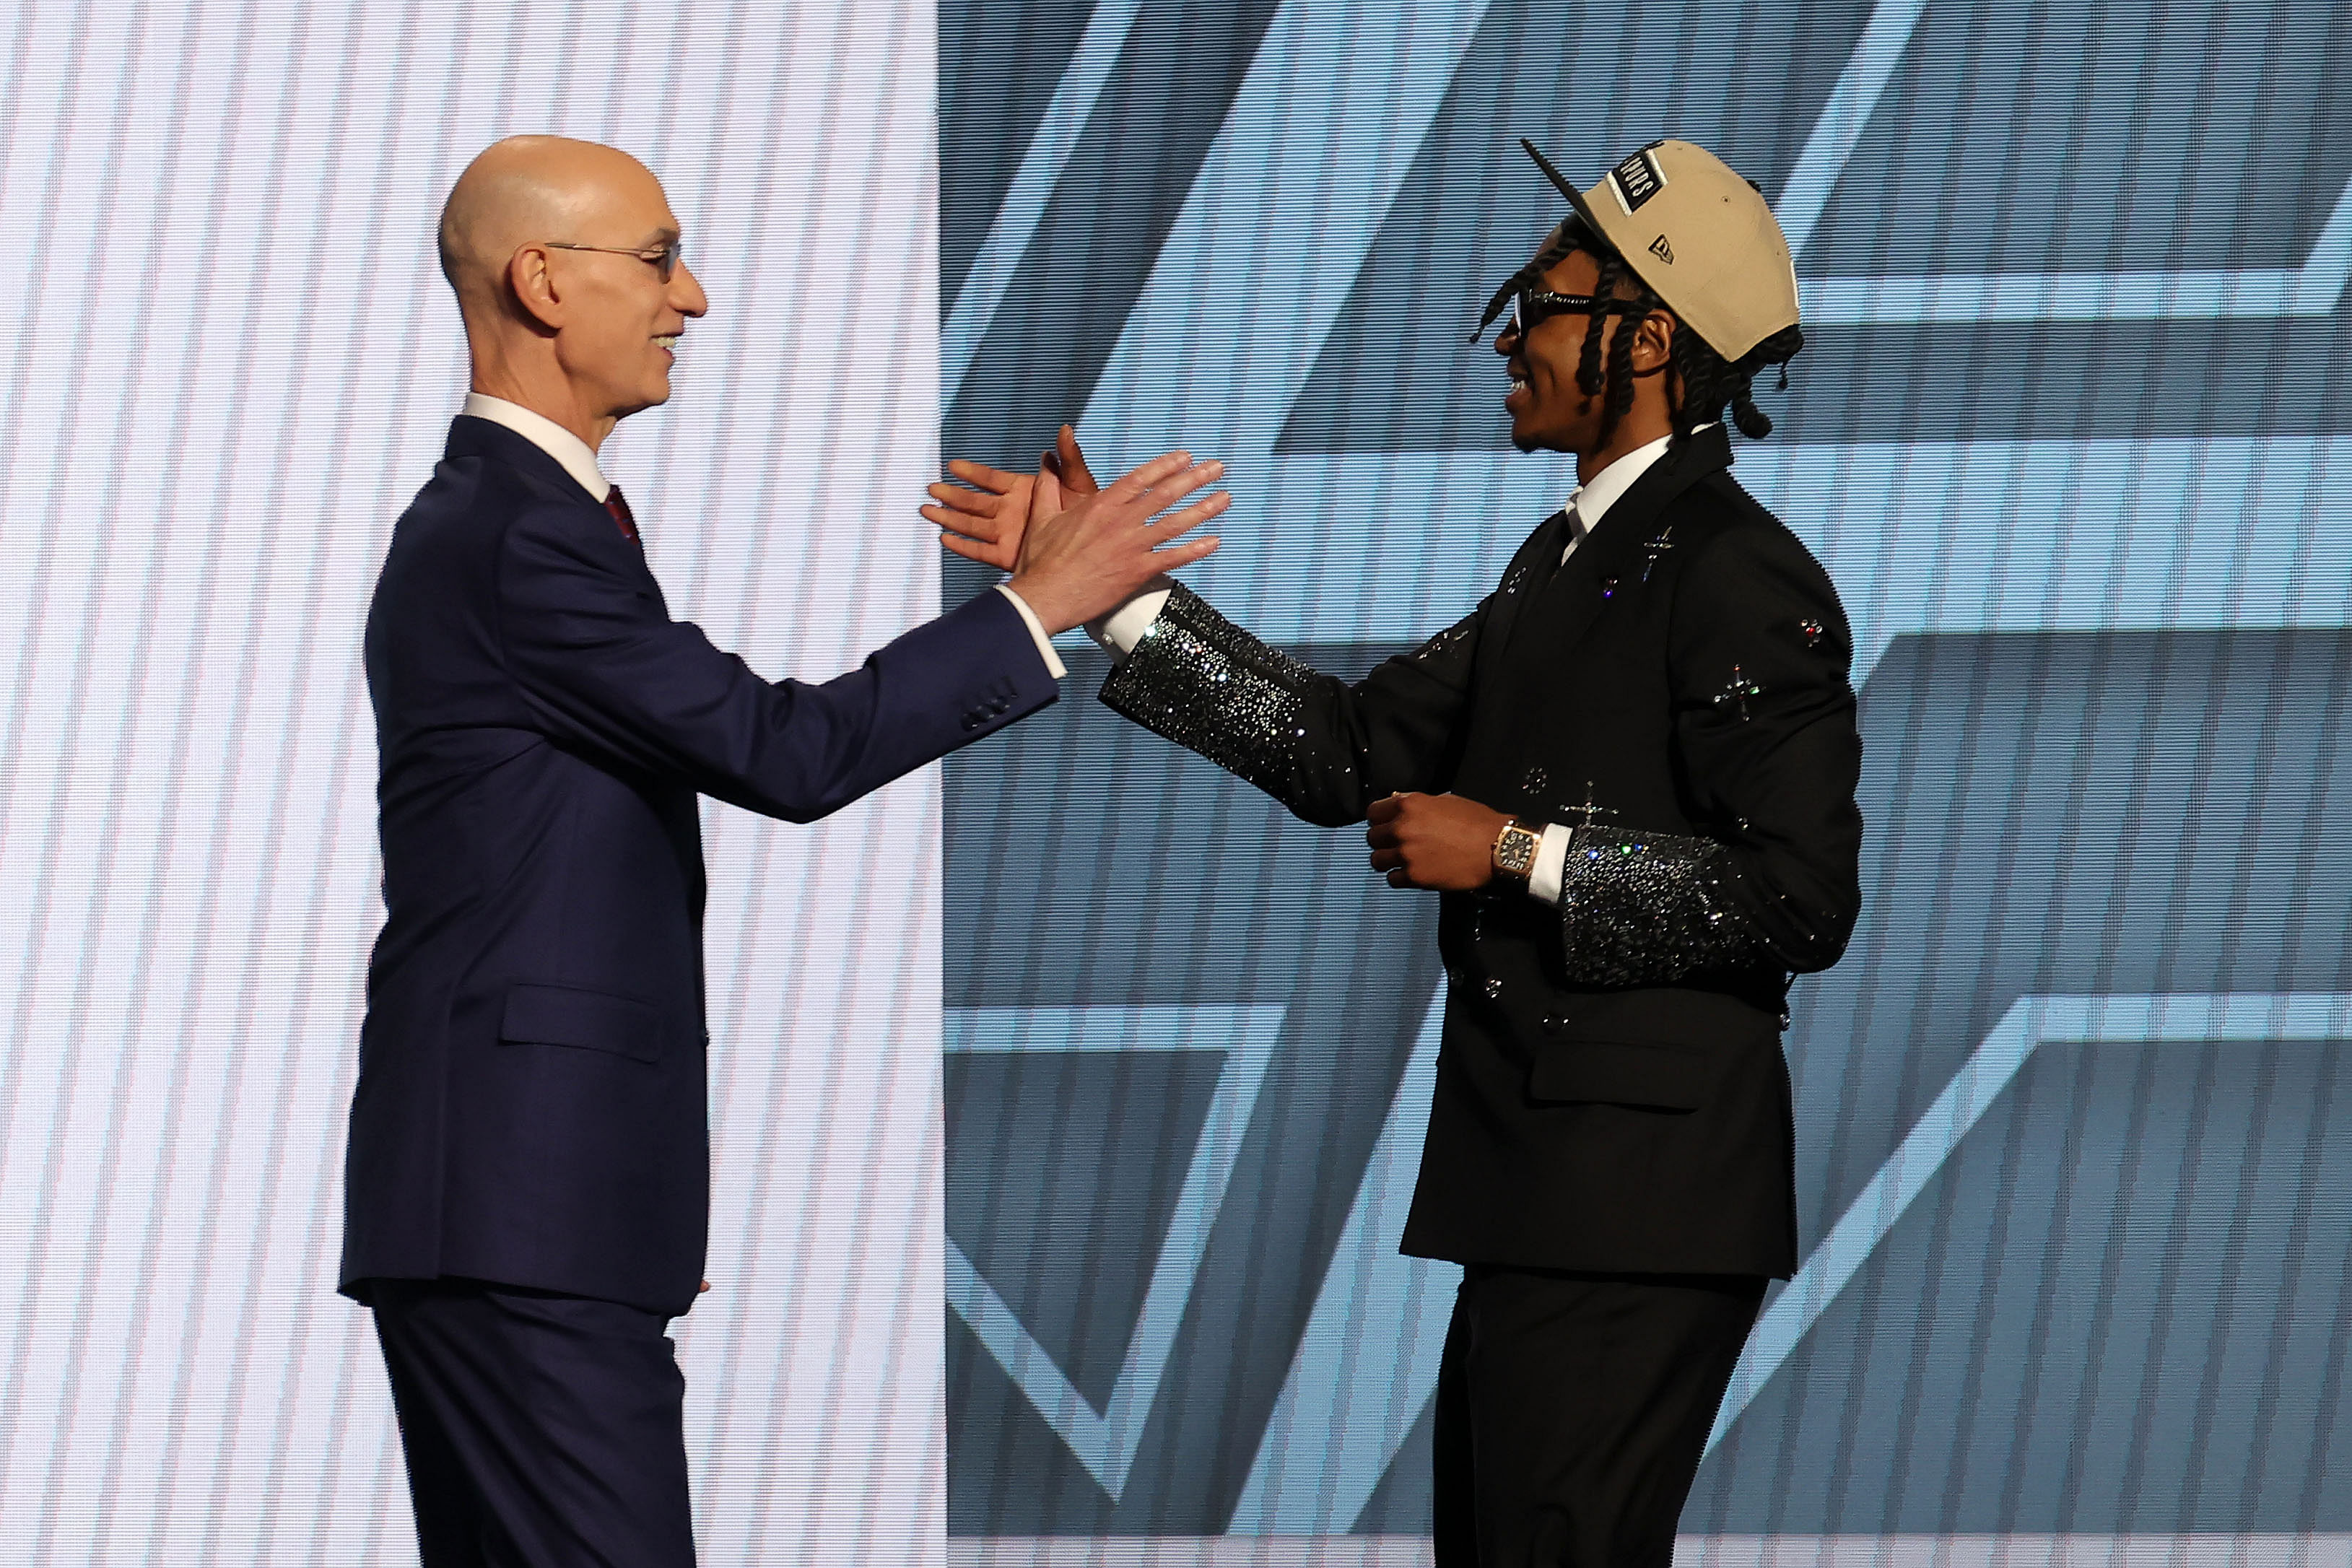 Rob Dillingham shakes hands with NBA Commissioner Adam Silver during the draft (Image Source: IMAGN).